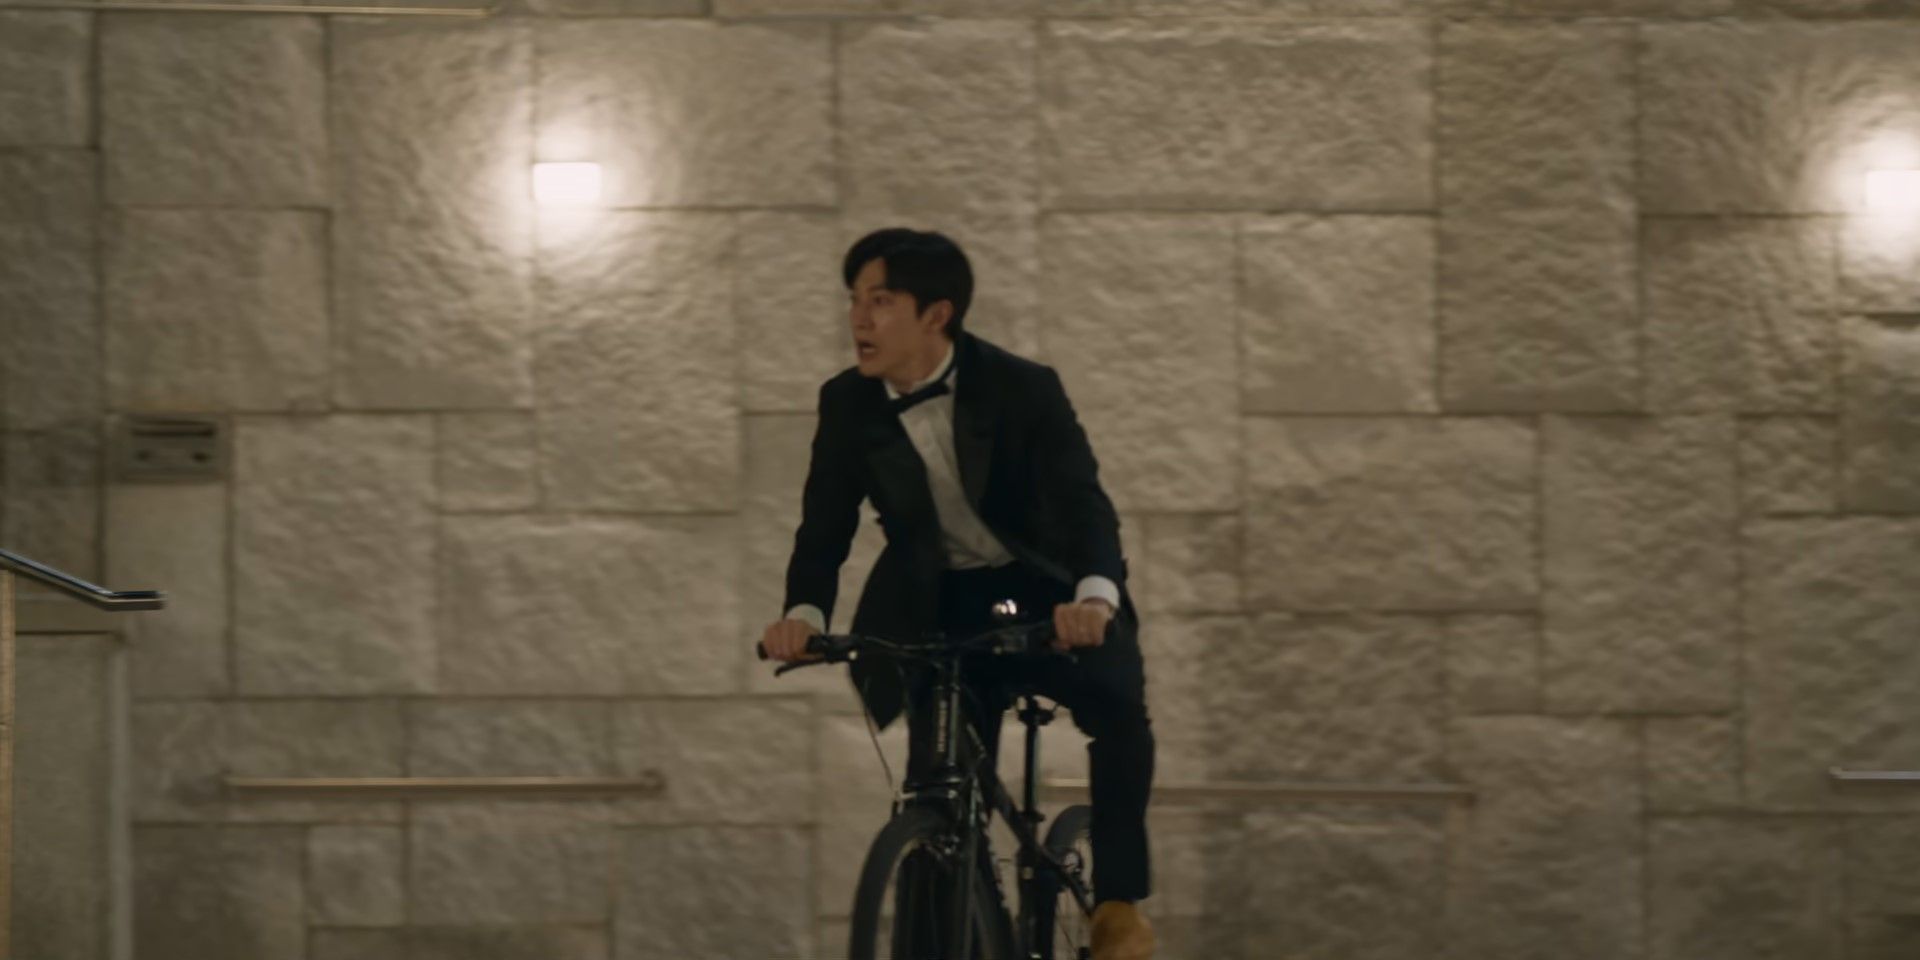 Soocheol rides a bike while crying in Queen of Tears